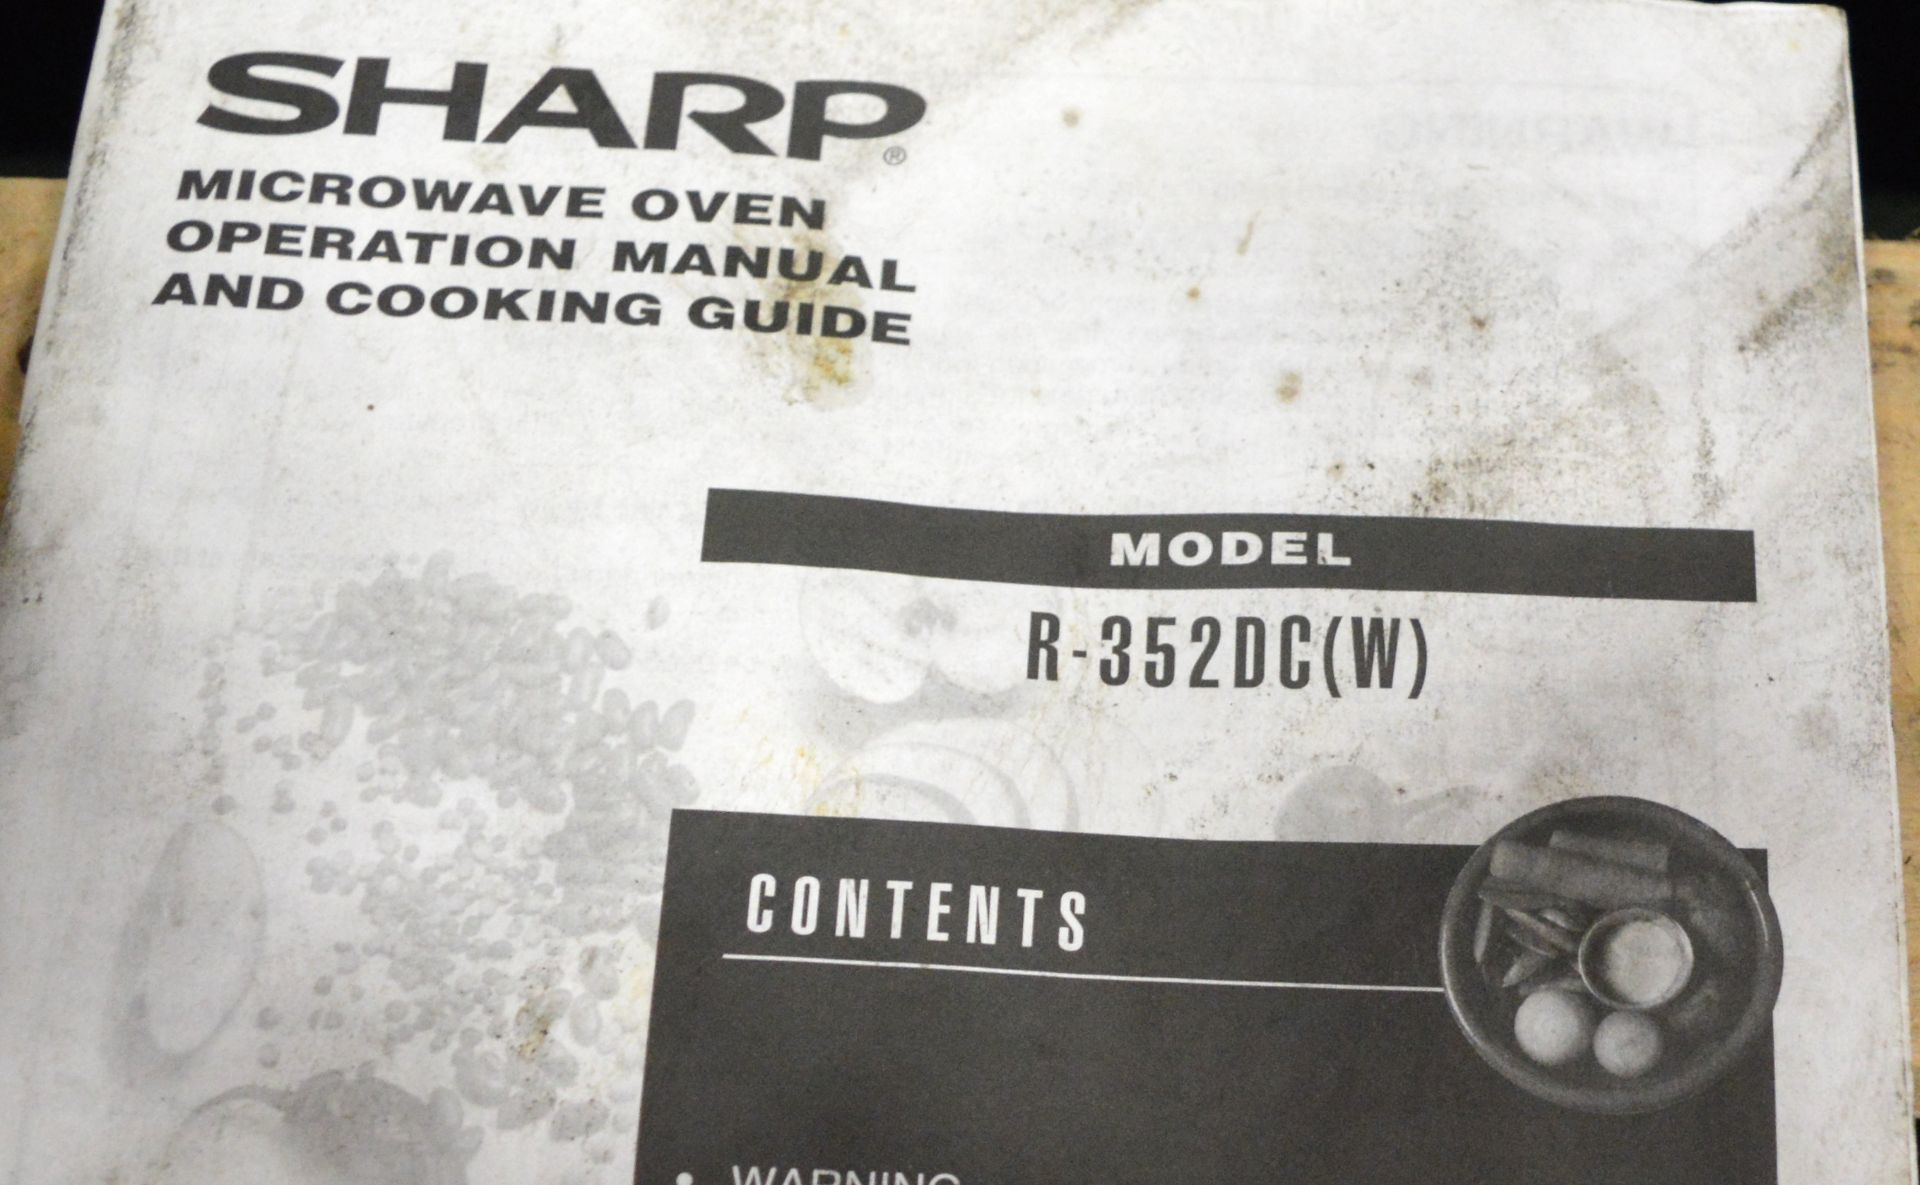 Sharp R-352DC(W) Microwave Oven. - Image 3 of 3